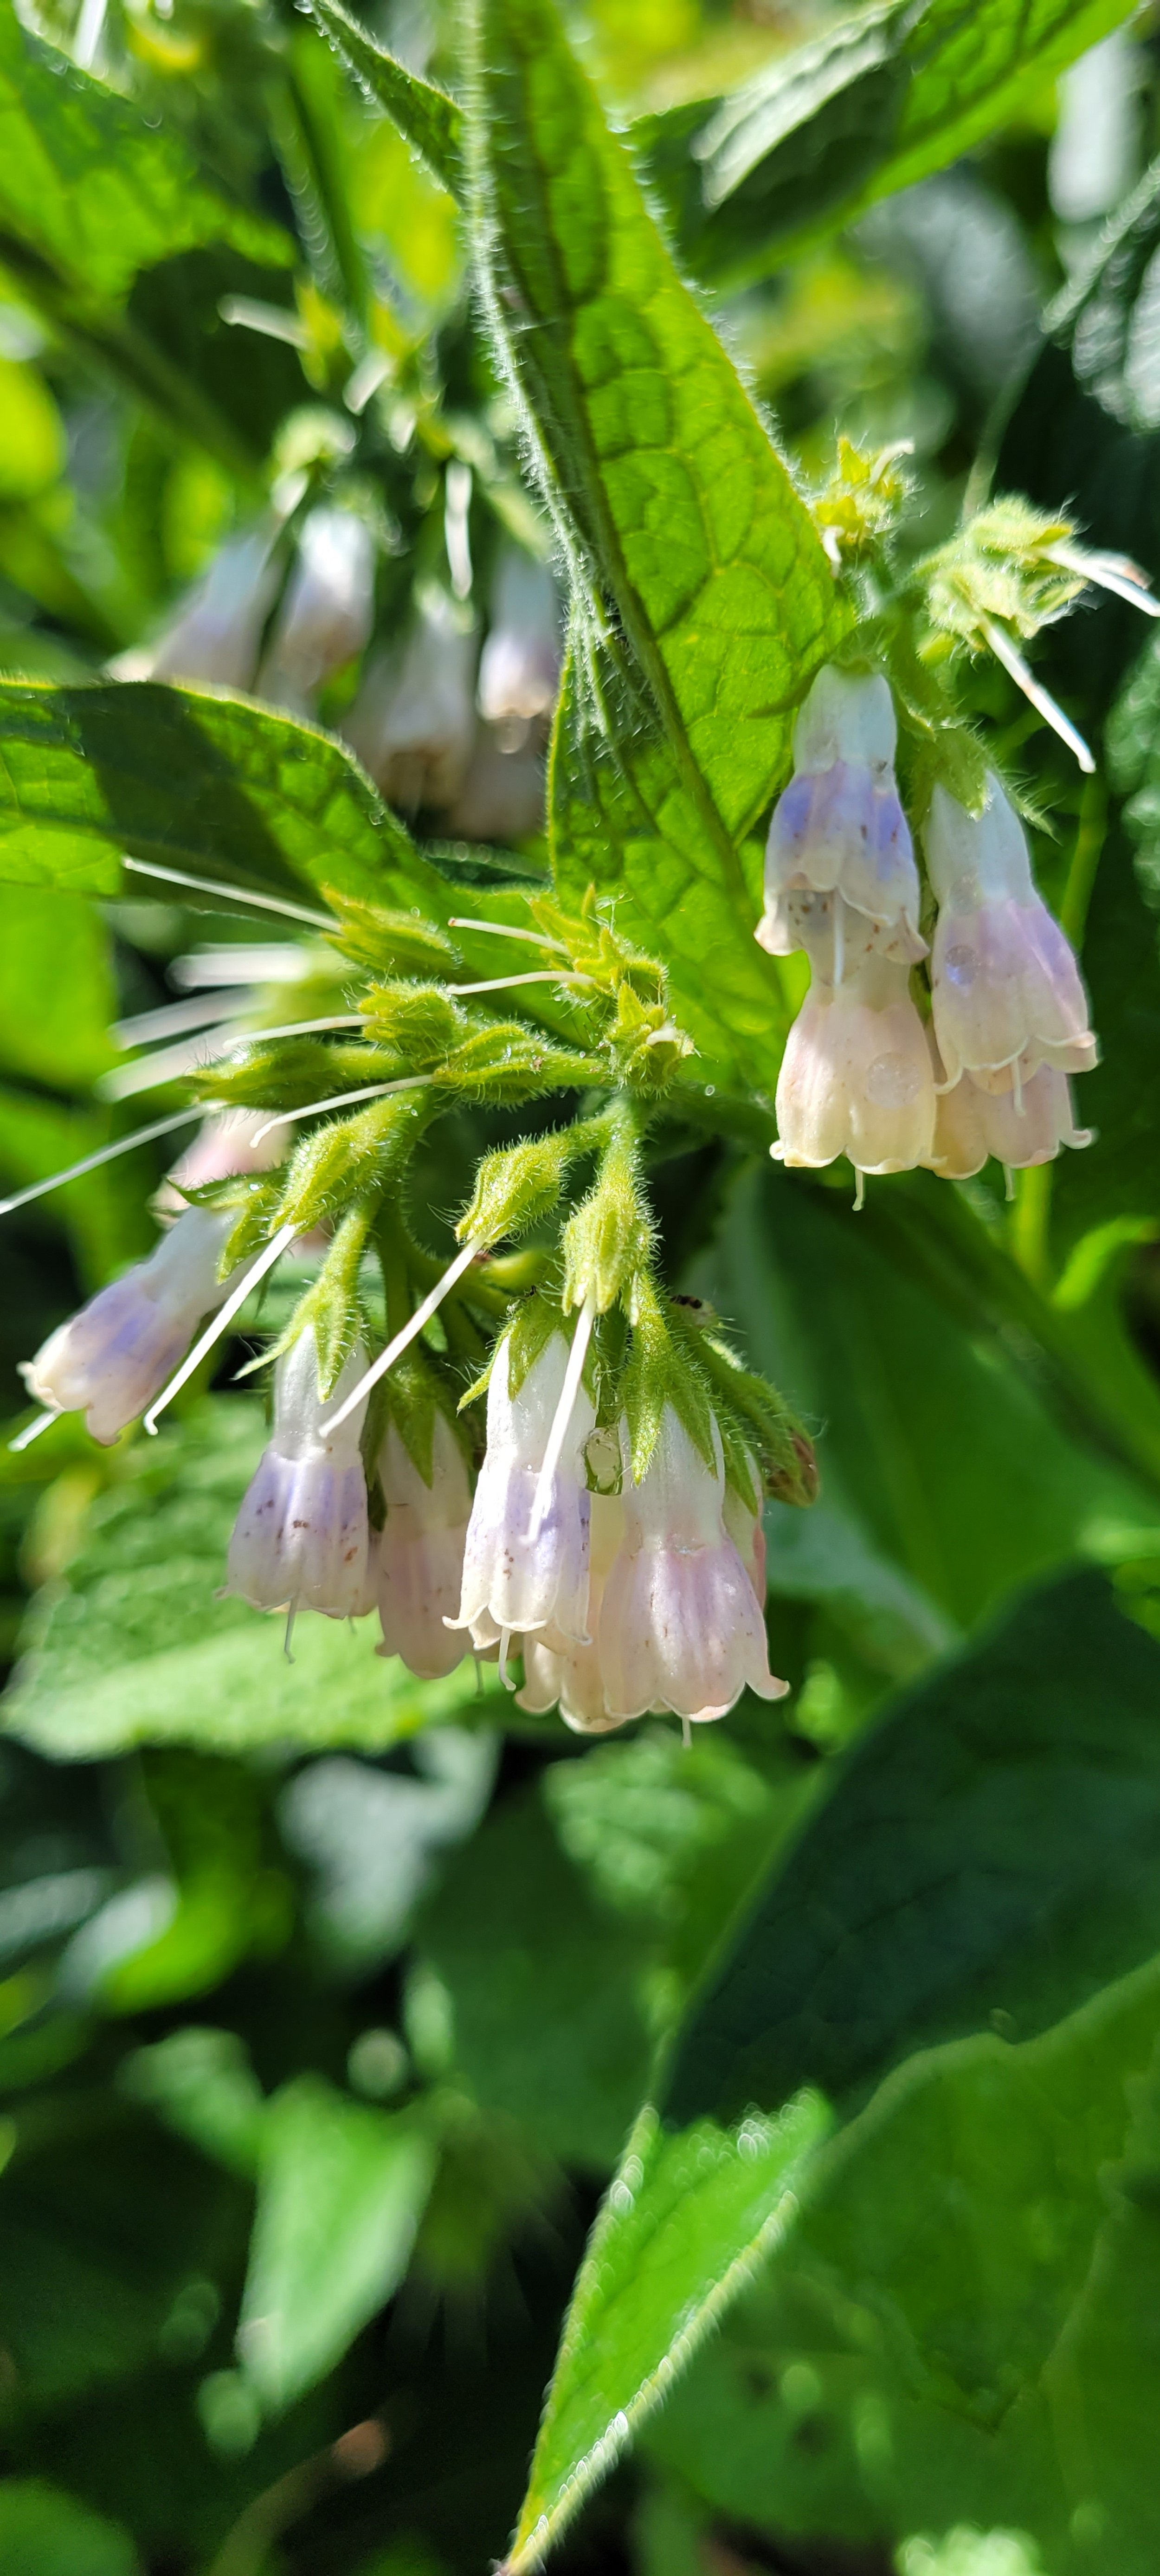 first aid OR infused oil workshop - white-flowered comfrey plant in bloom.jpg